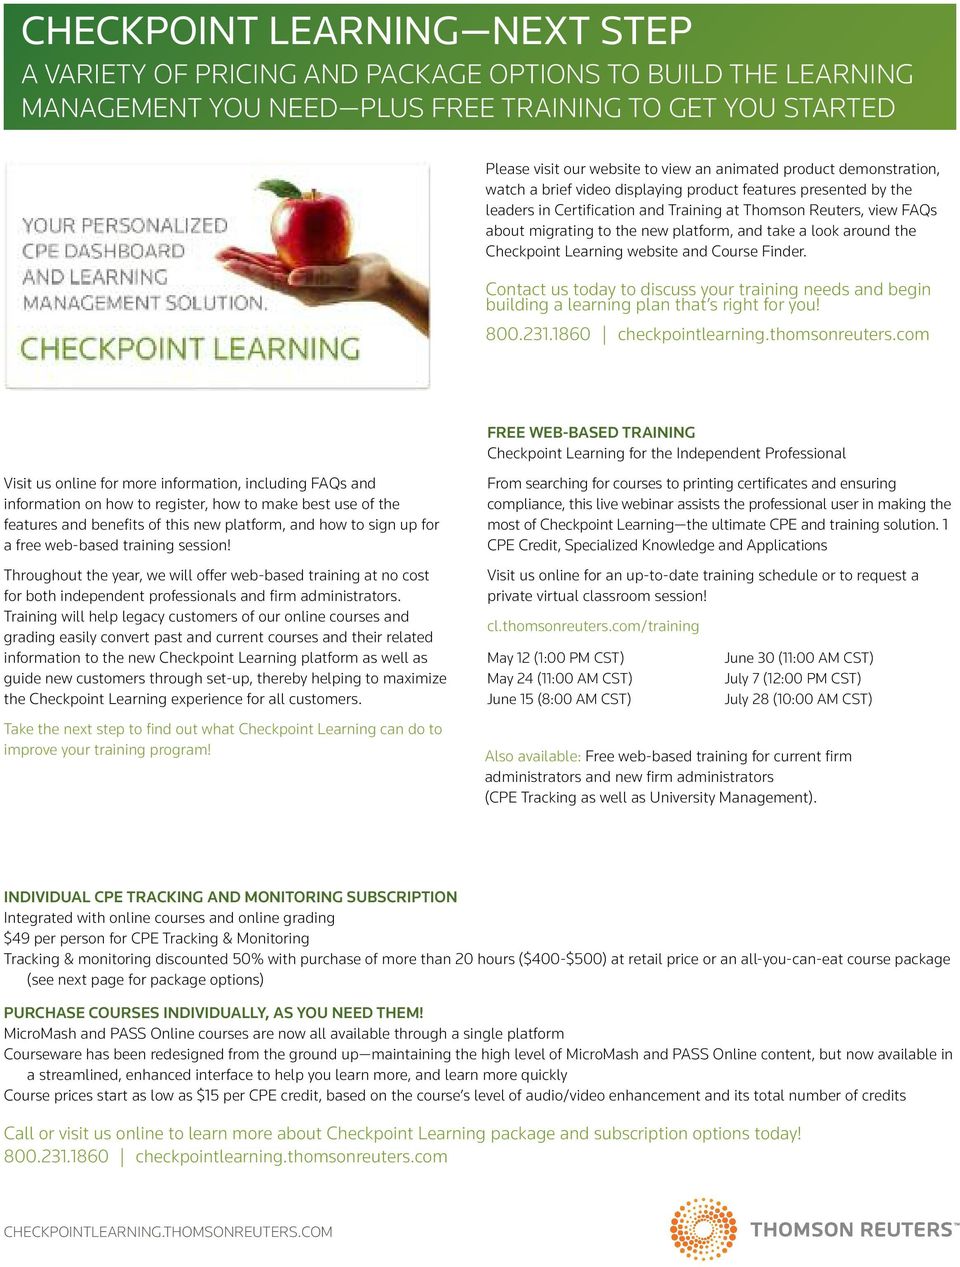 take a look around the Checkpoint Learning website and Course Finder. Contact us today to discuss your training needs and begin building a learning plan that s right for you! 800.231.